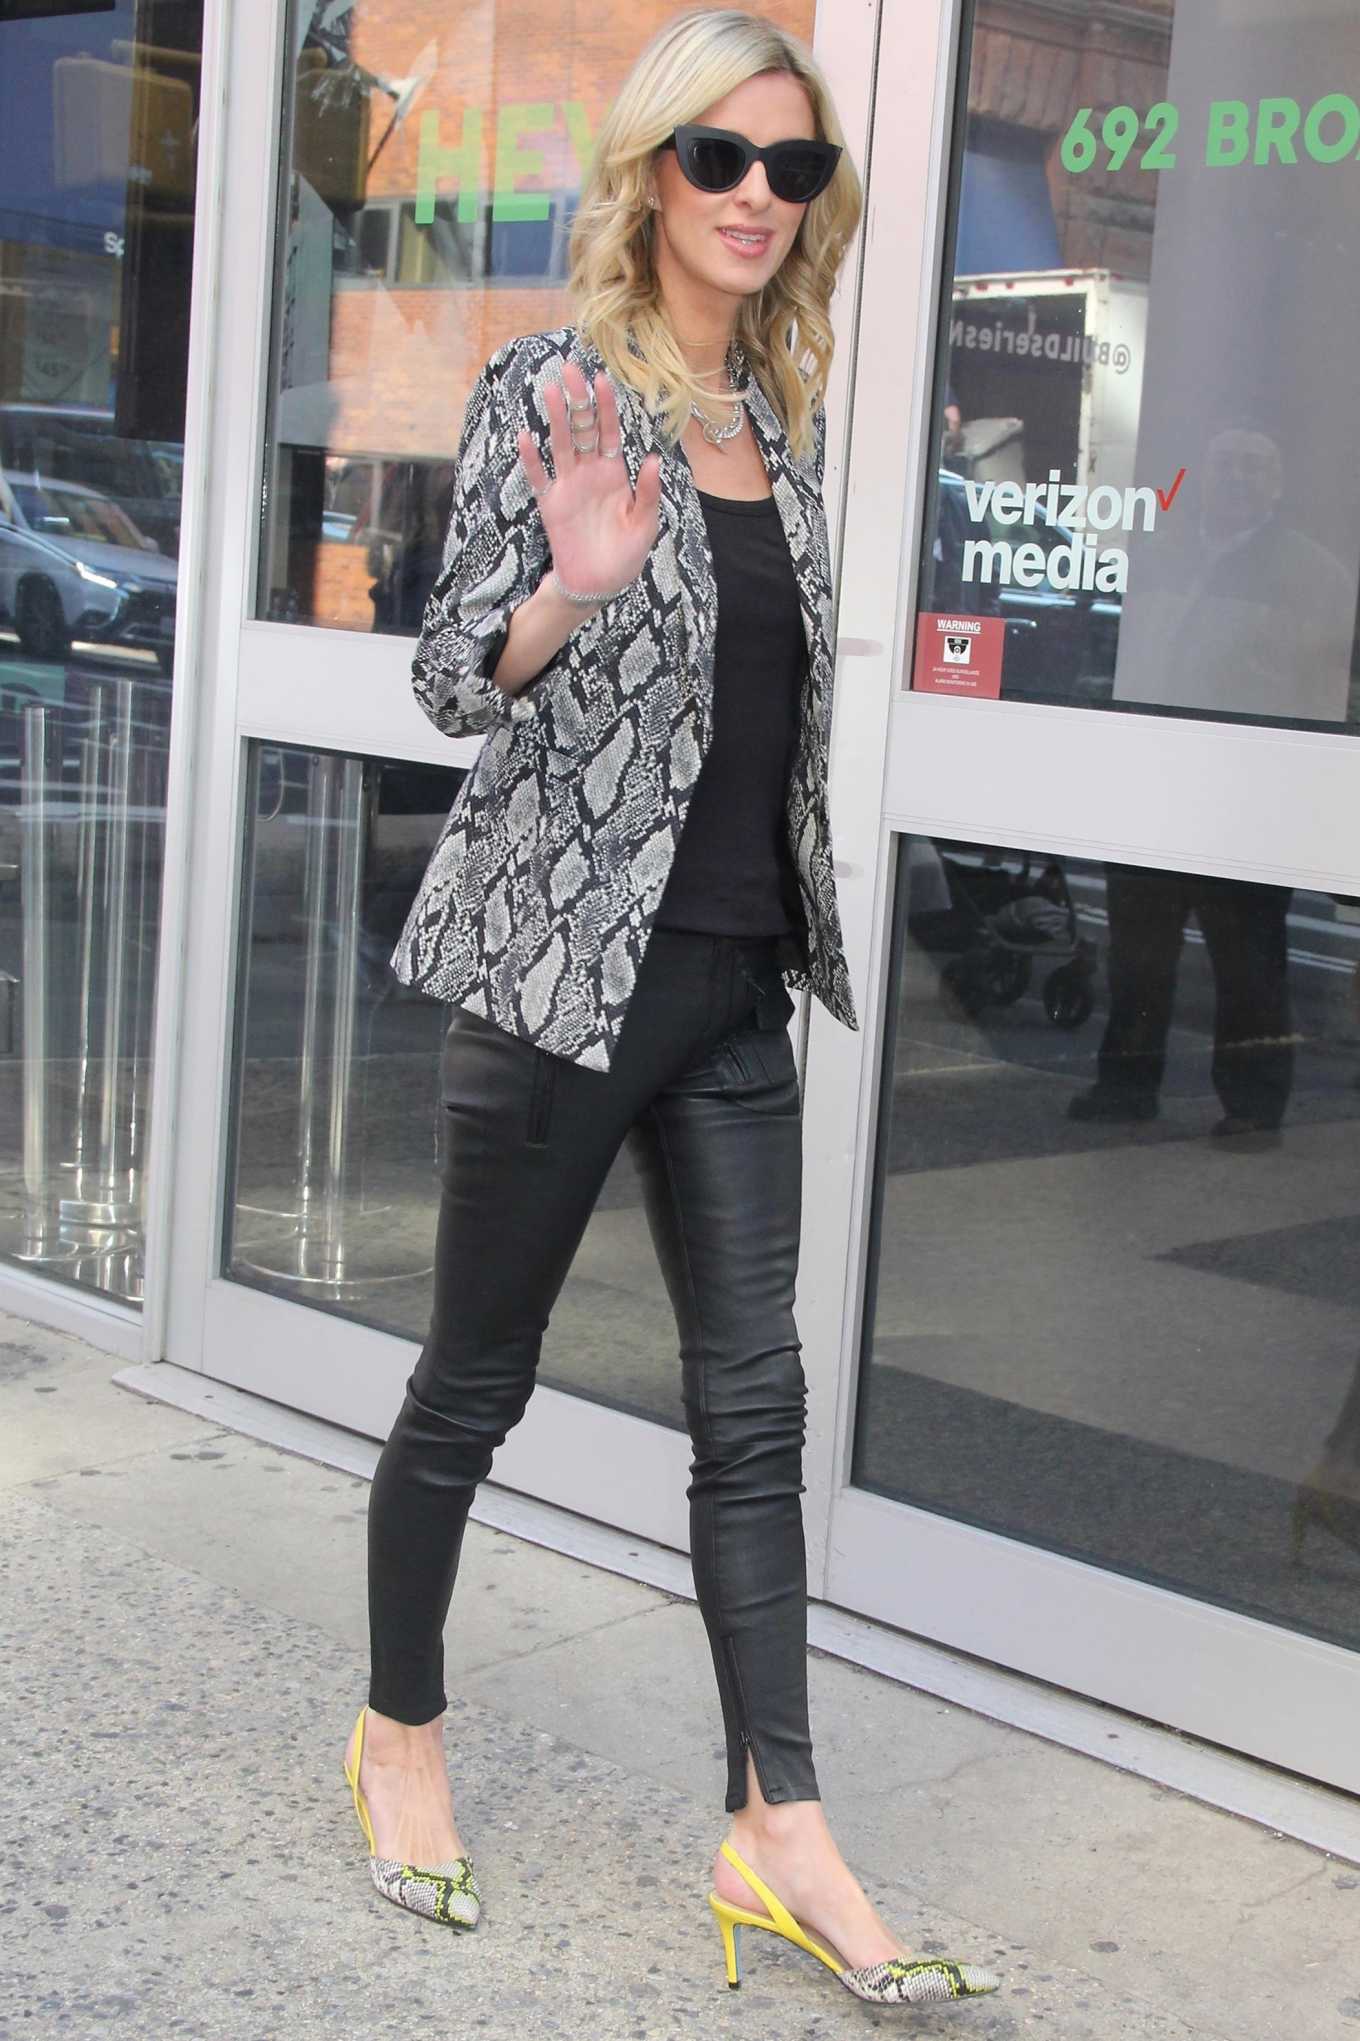 Nicky Hilton â€“ Seen at AOL building in New York